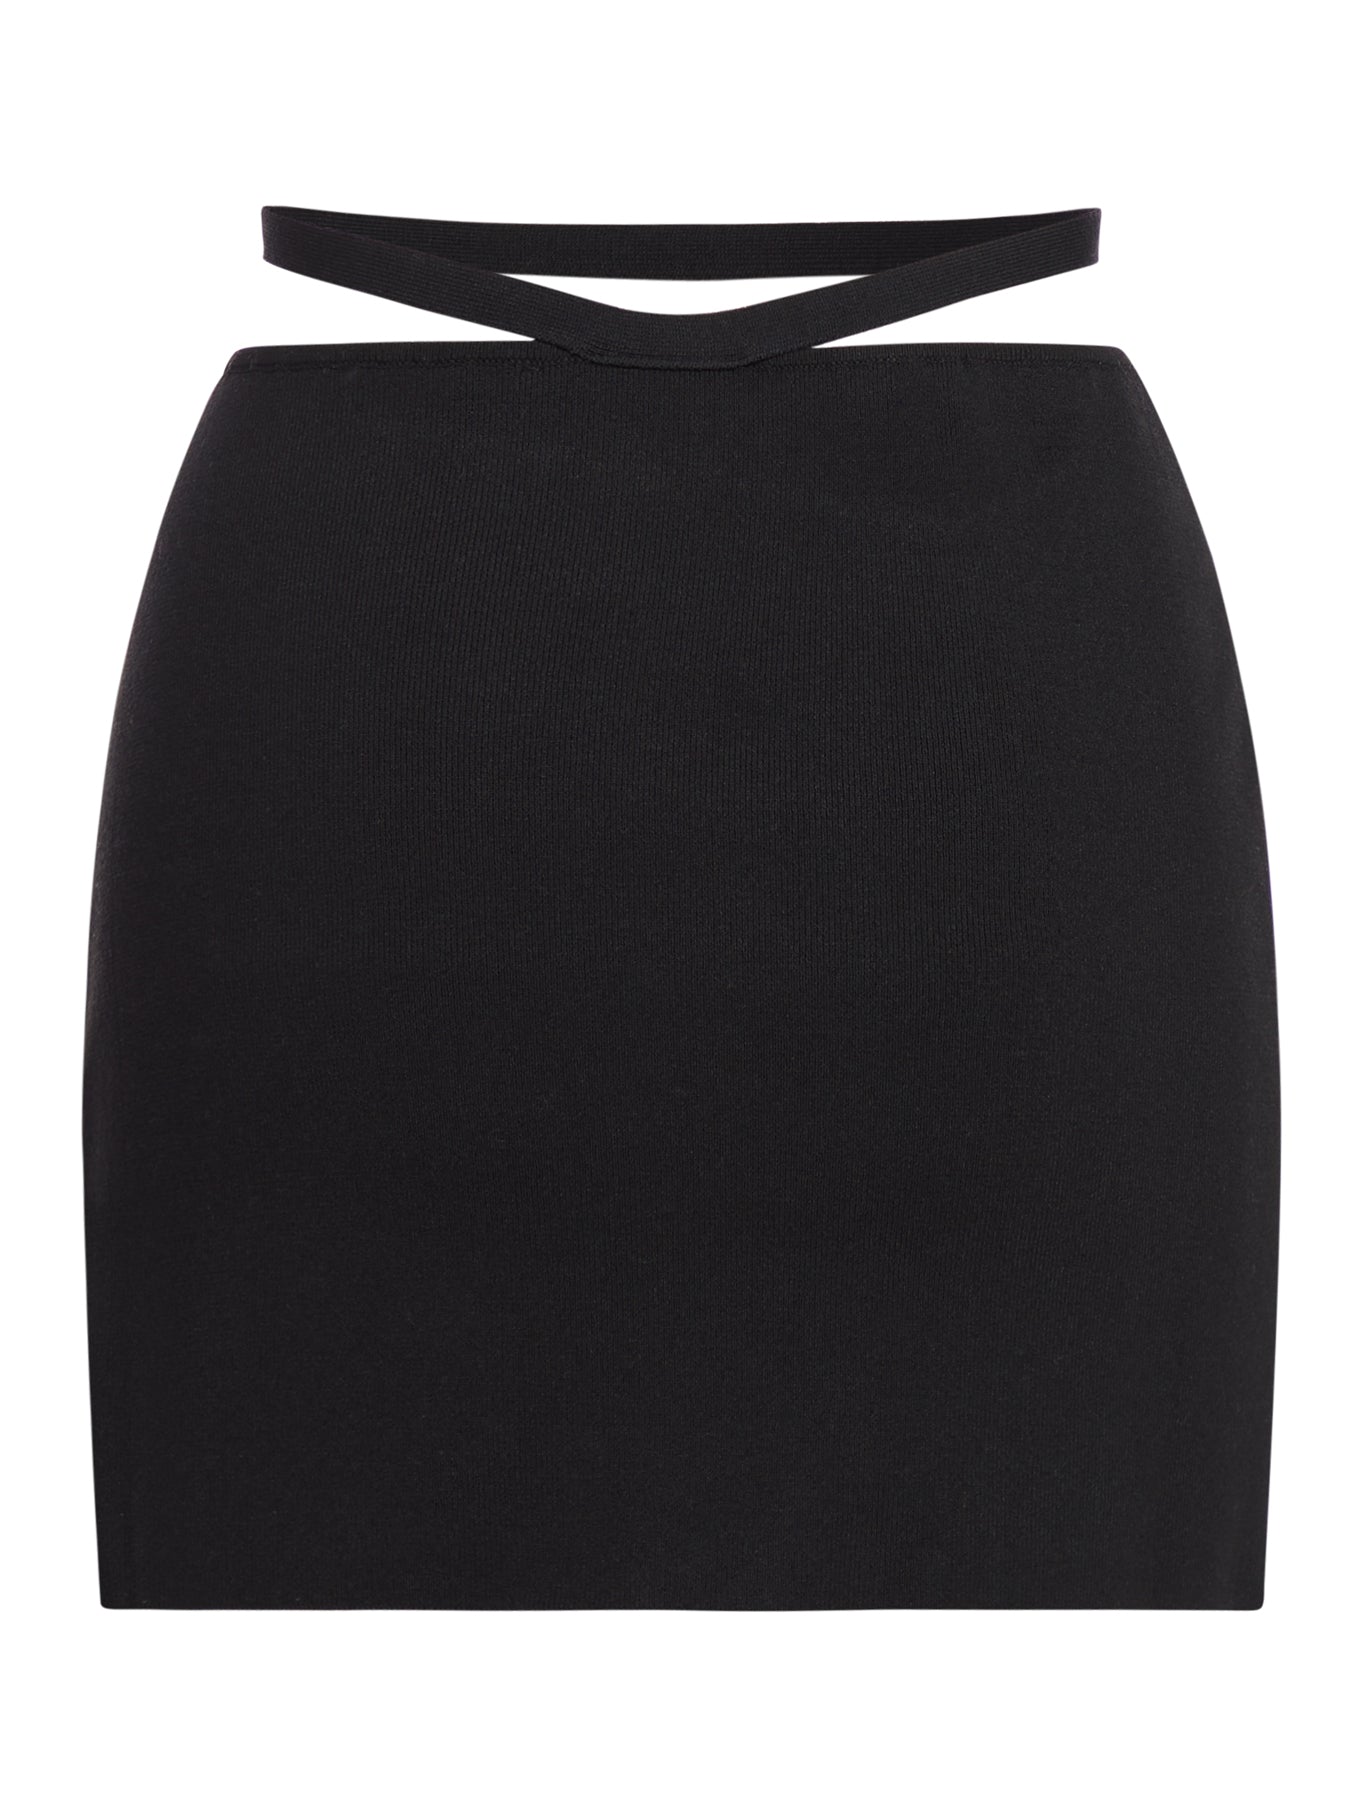 short skirt with cut out detail